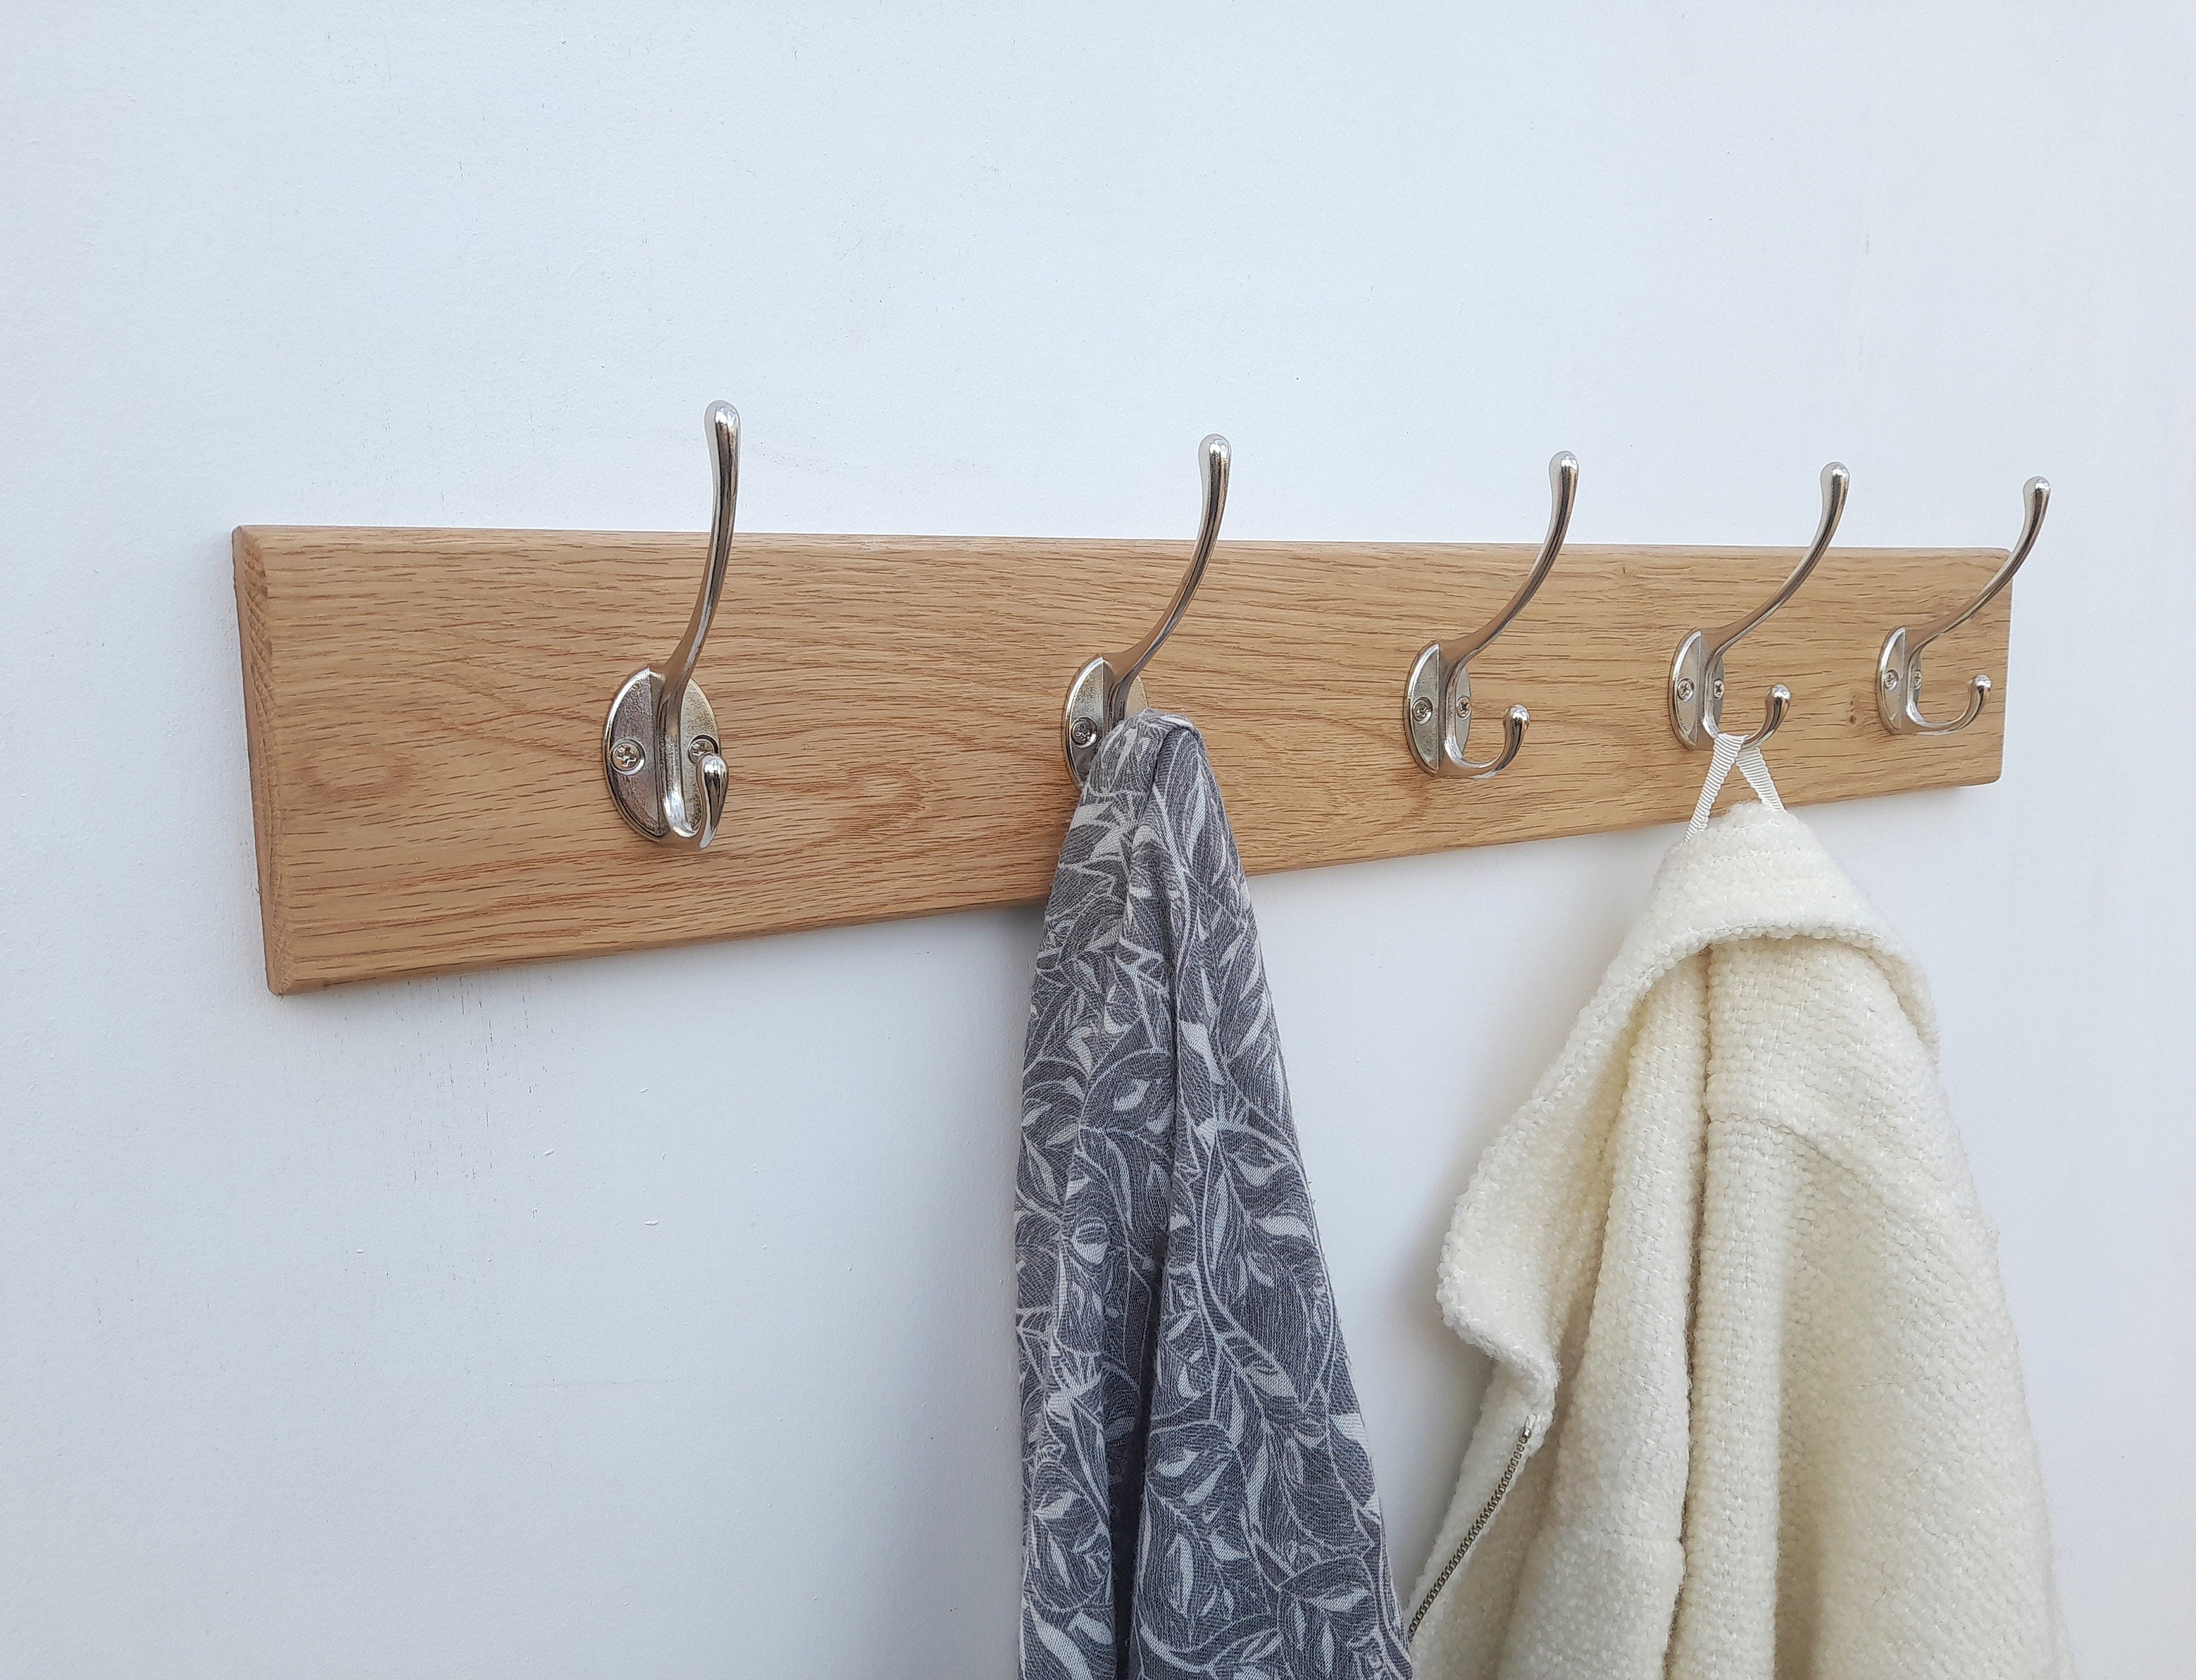 10 Units Alloy Coat Hooks Double Hooks Heavy Duty Wall Mounted for Hat  Hardware Dual Prong Retro Coat Hanger Home Accessories